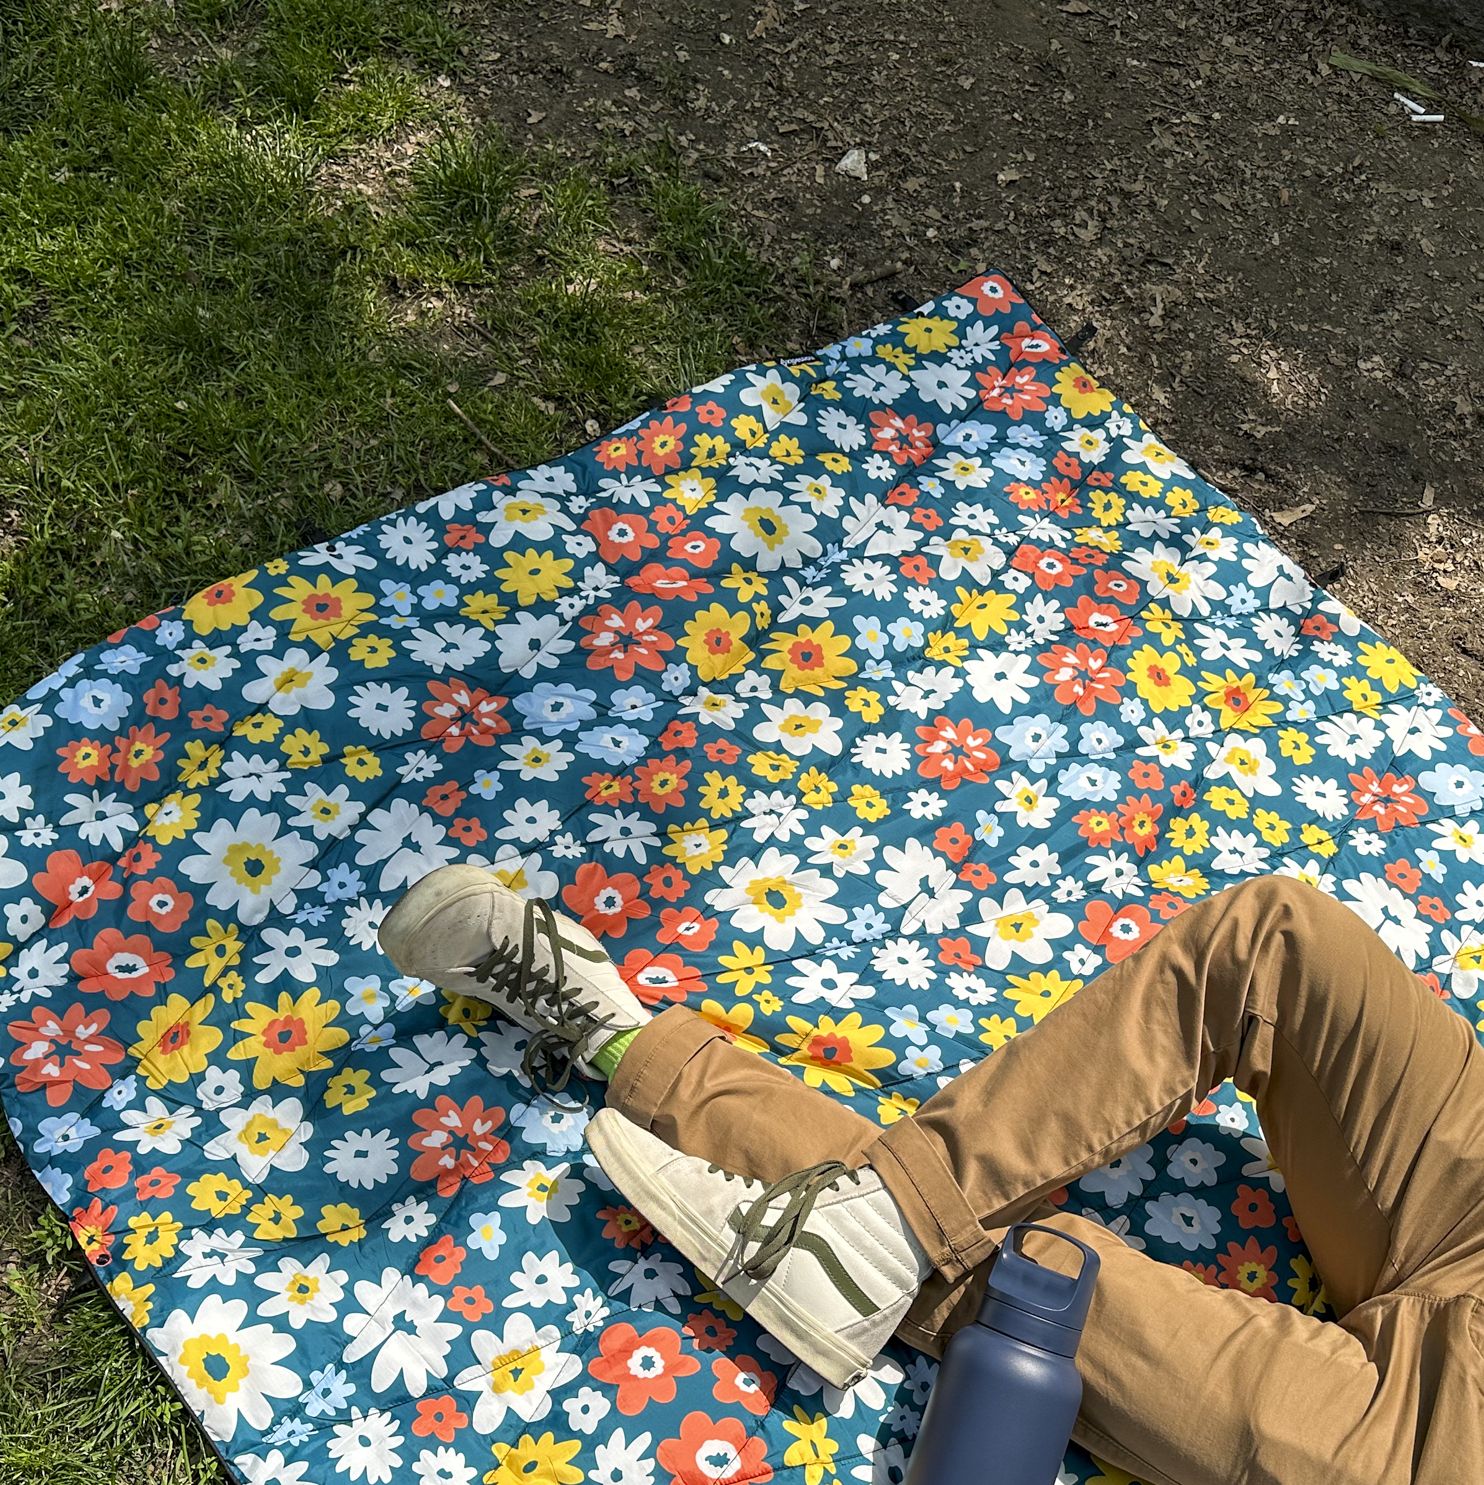 Need a Spot to Post Up for a Picnic or at the Campsite? Get an Outdoor Blanket.